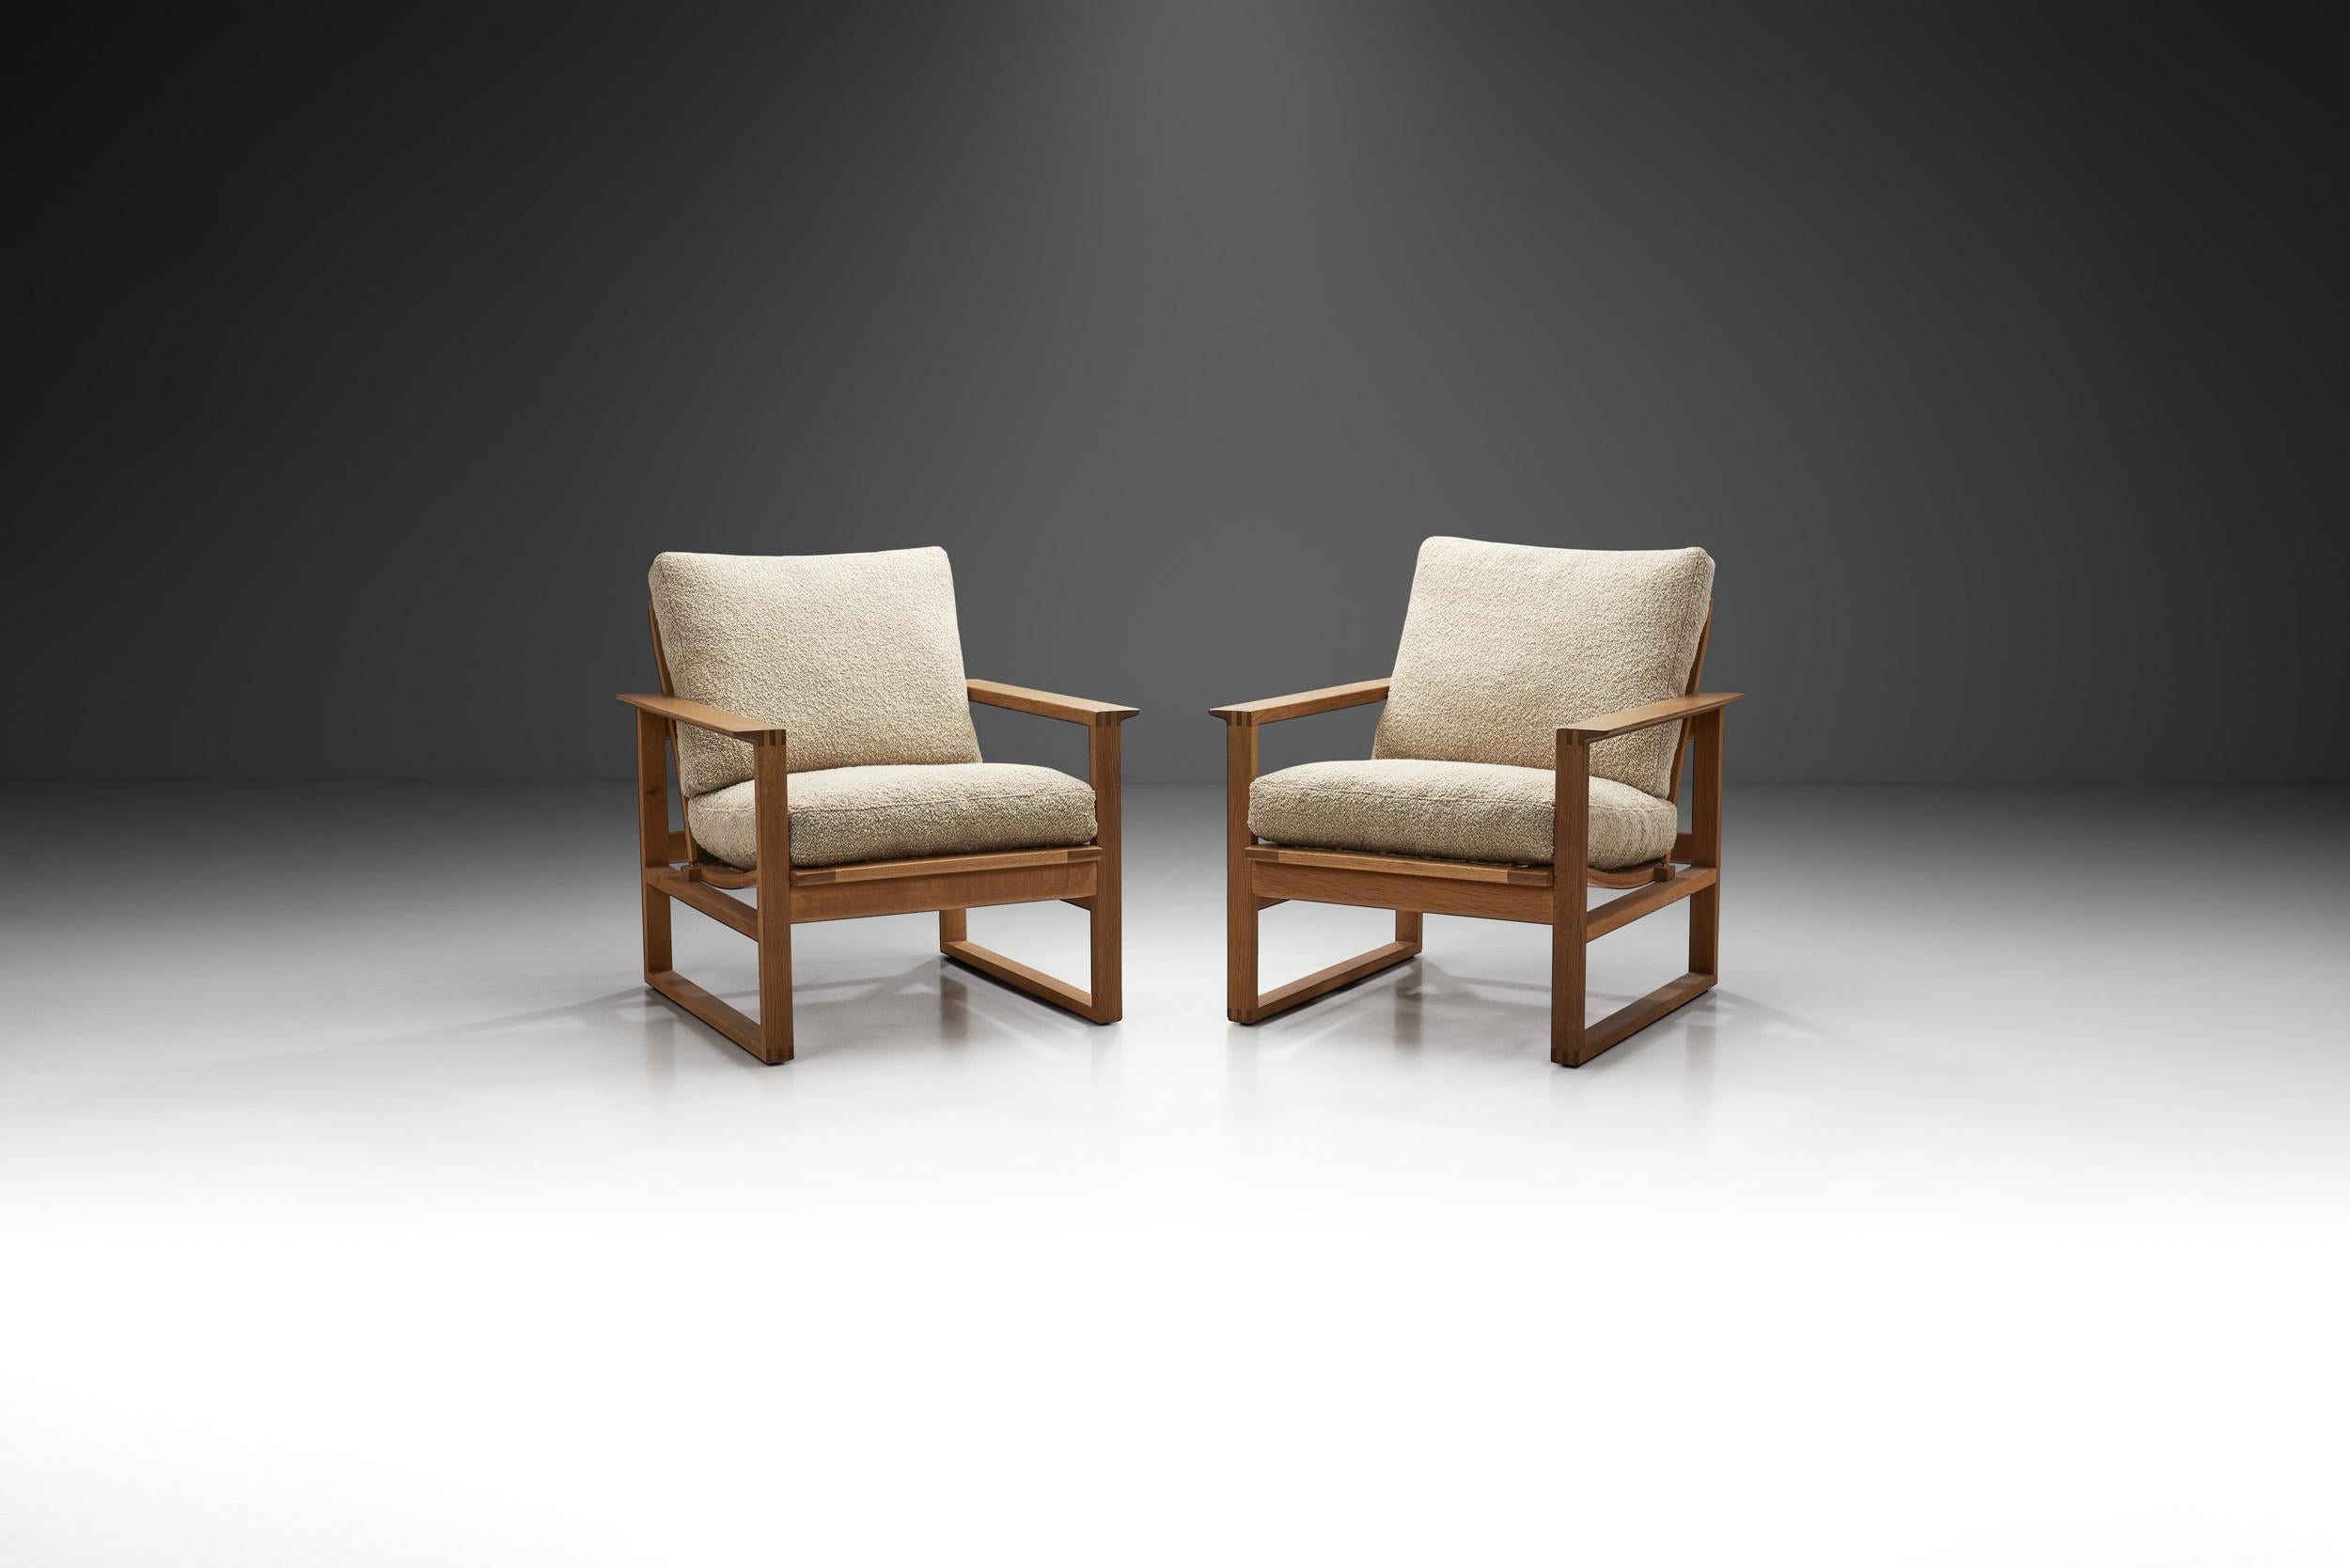 This pair of Børge Mogensen lounge chairs was designed in 1956 with the model number 2256 for Fredericia Stolefabrik. The Danish designer’s most iconic pieces were developed at Fredericia’s workshop.

Børge Mogensen was one of the most influential